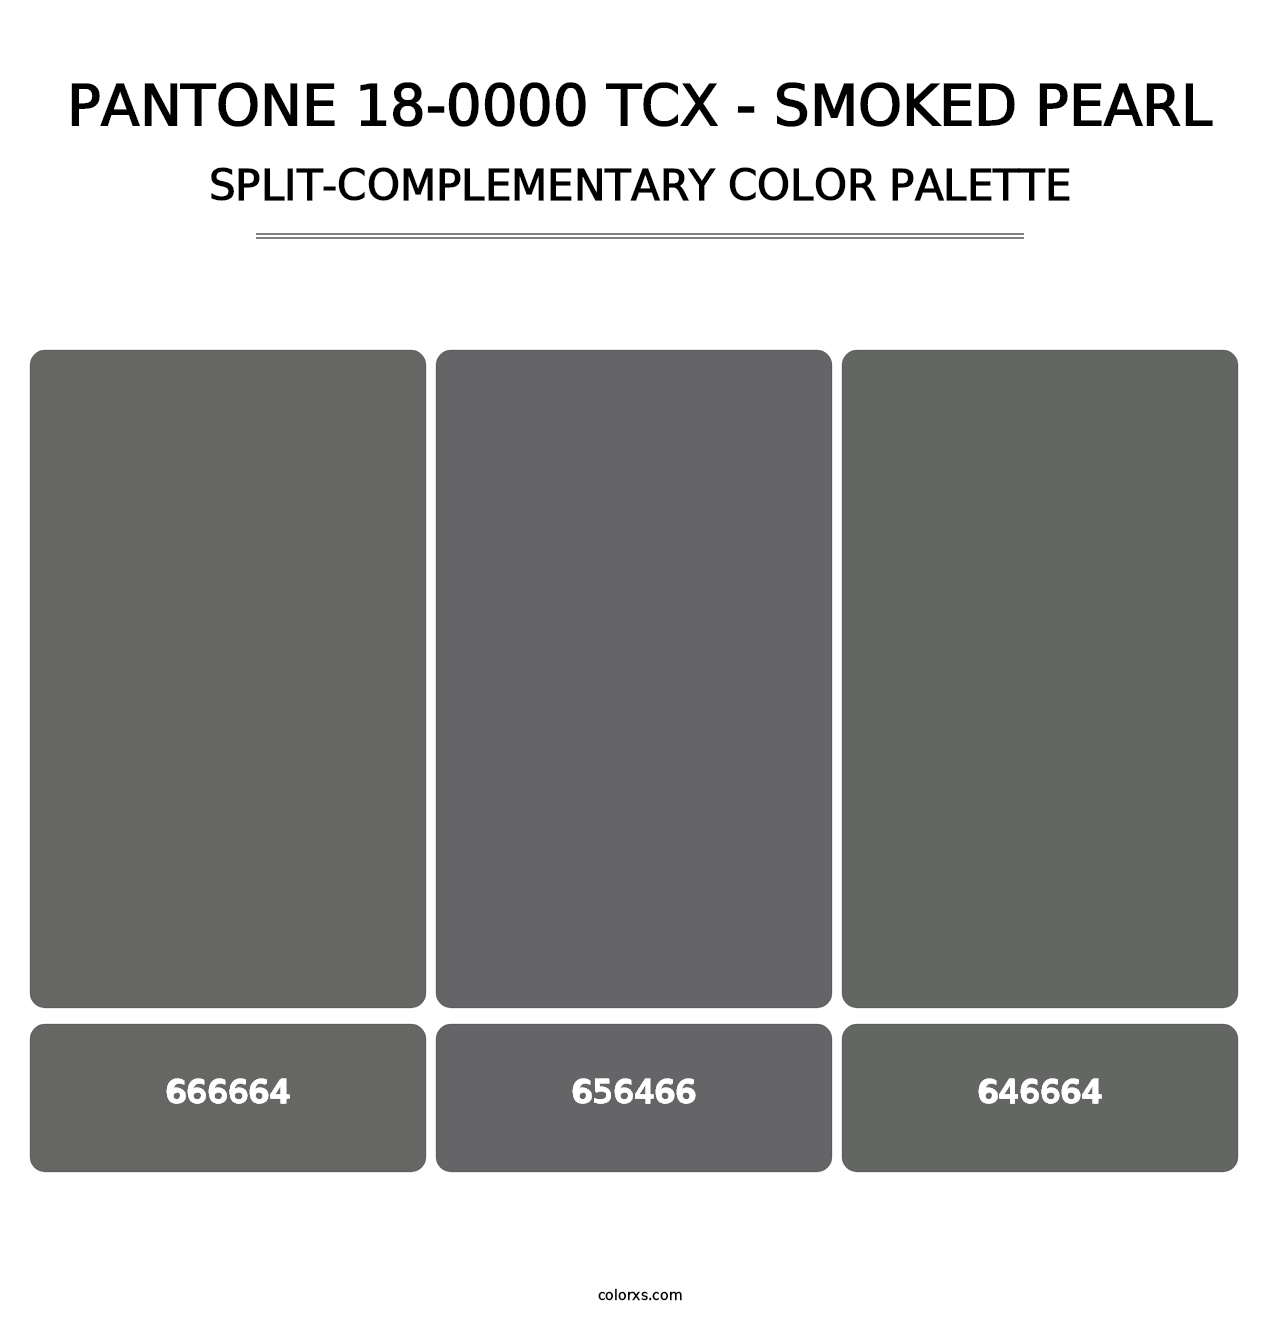 PANTONE 18-0000 TCX - Smoked Pearl - Split-Complementary Color Palette